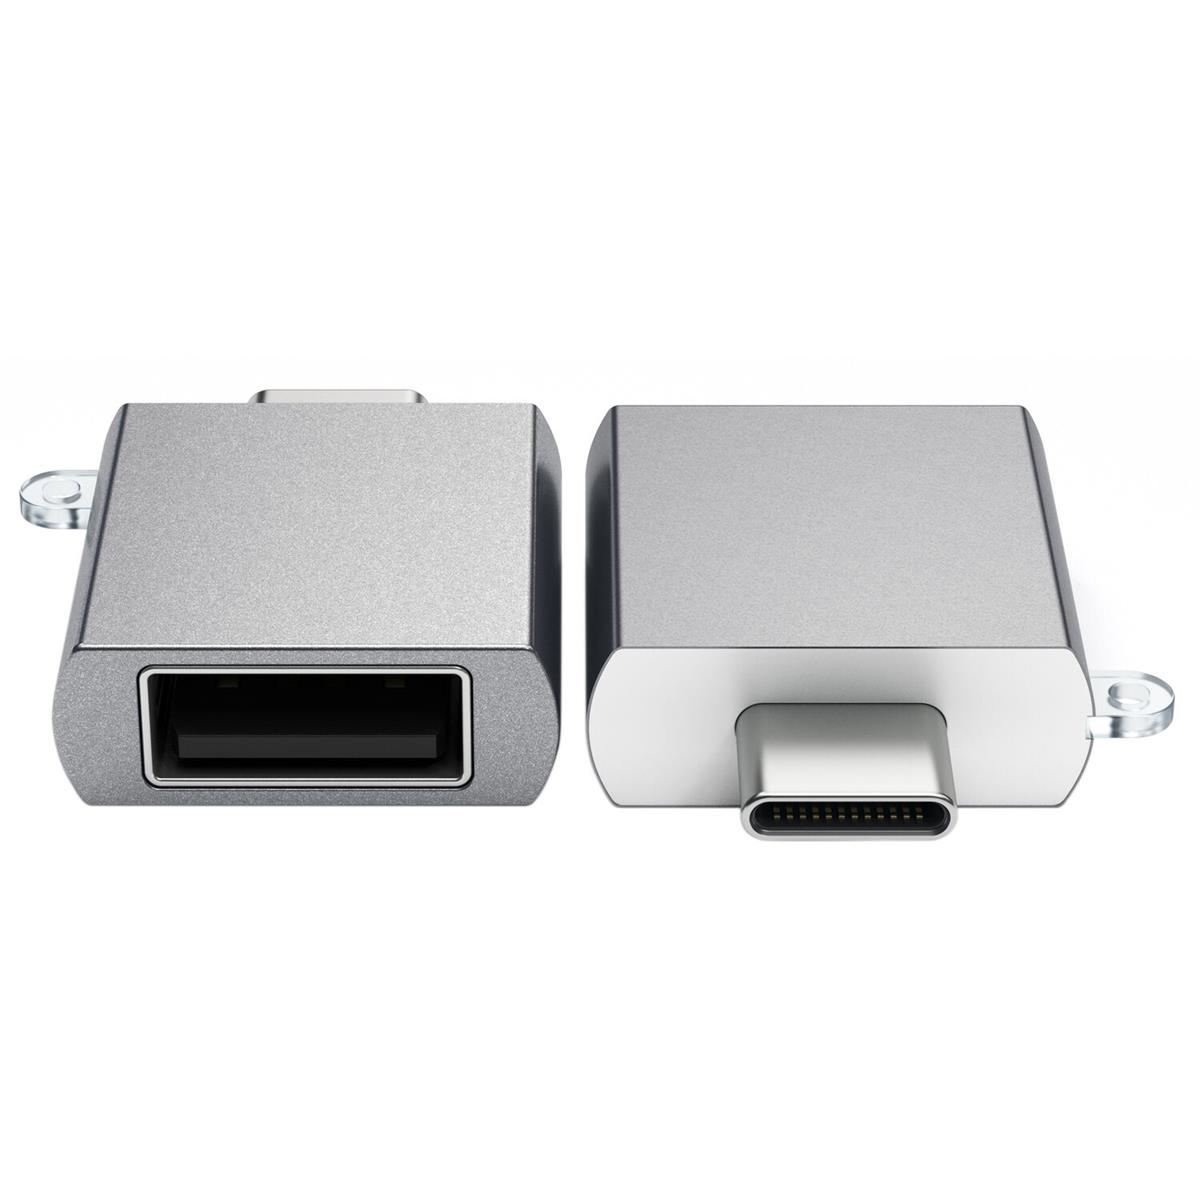 Image of Satechi Aluminum USB 3.0 Type-C to Type-A Adapter